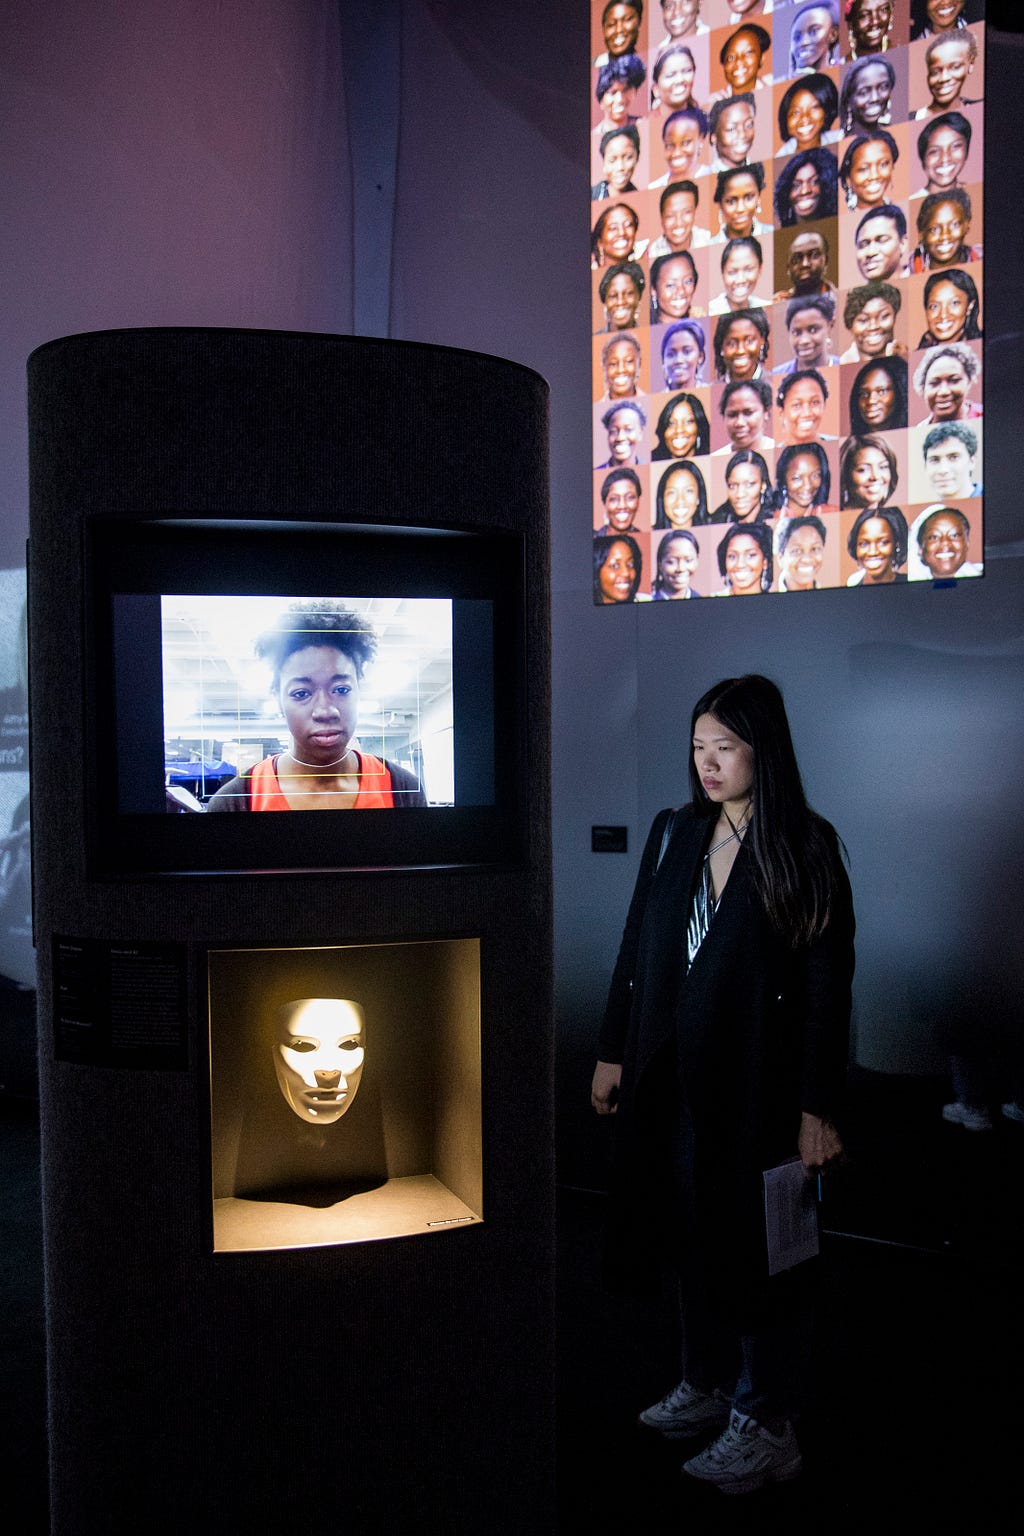 A tall, dark oblong cylindrical plinth containing two niches displaying a video of Joy Buolamwini along with a white mask.